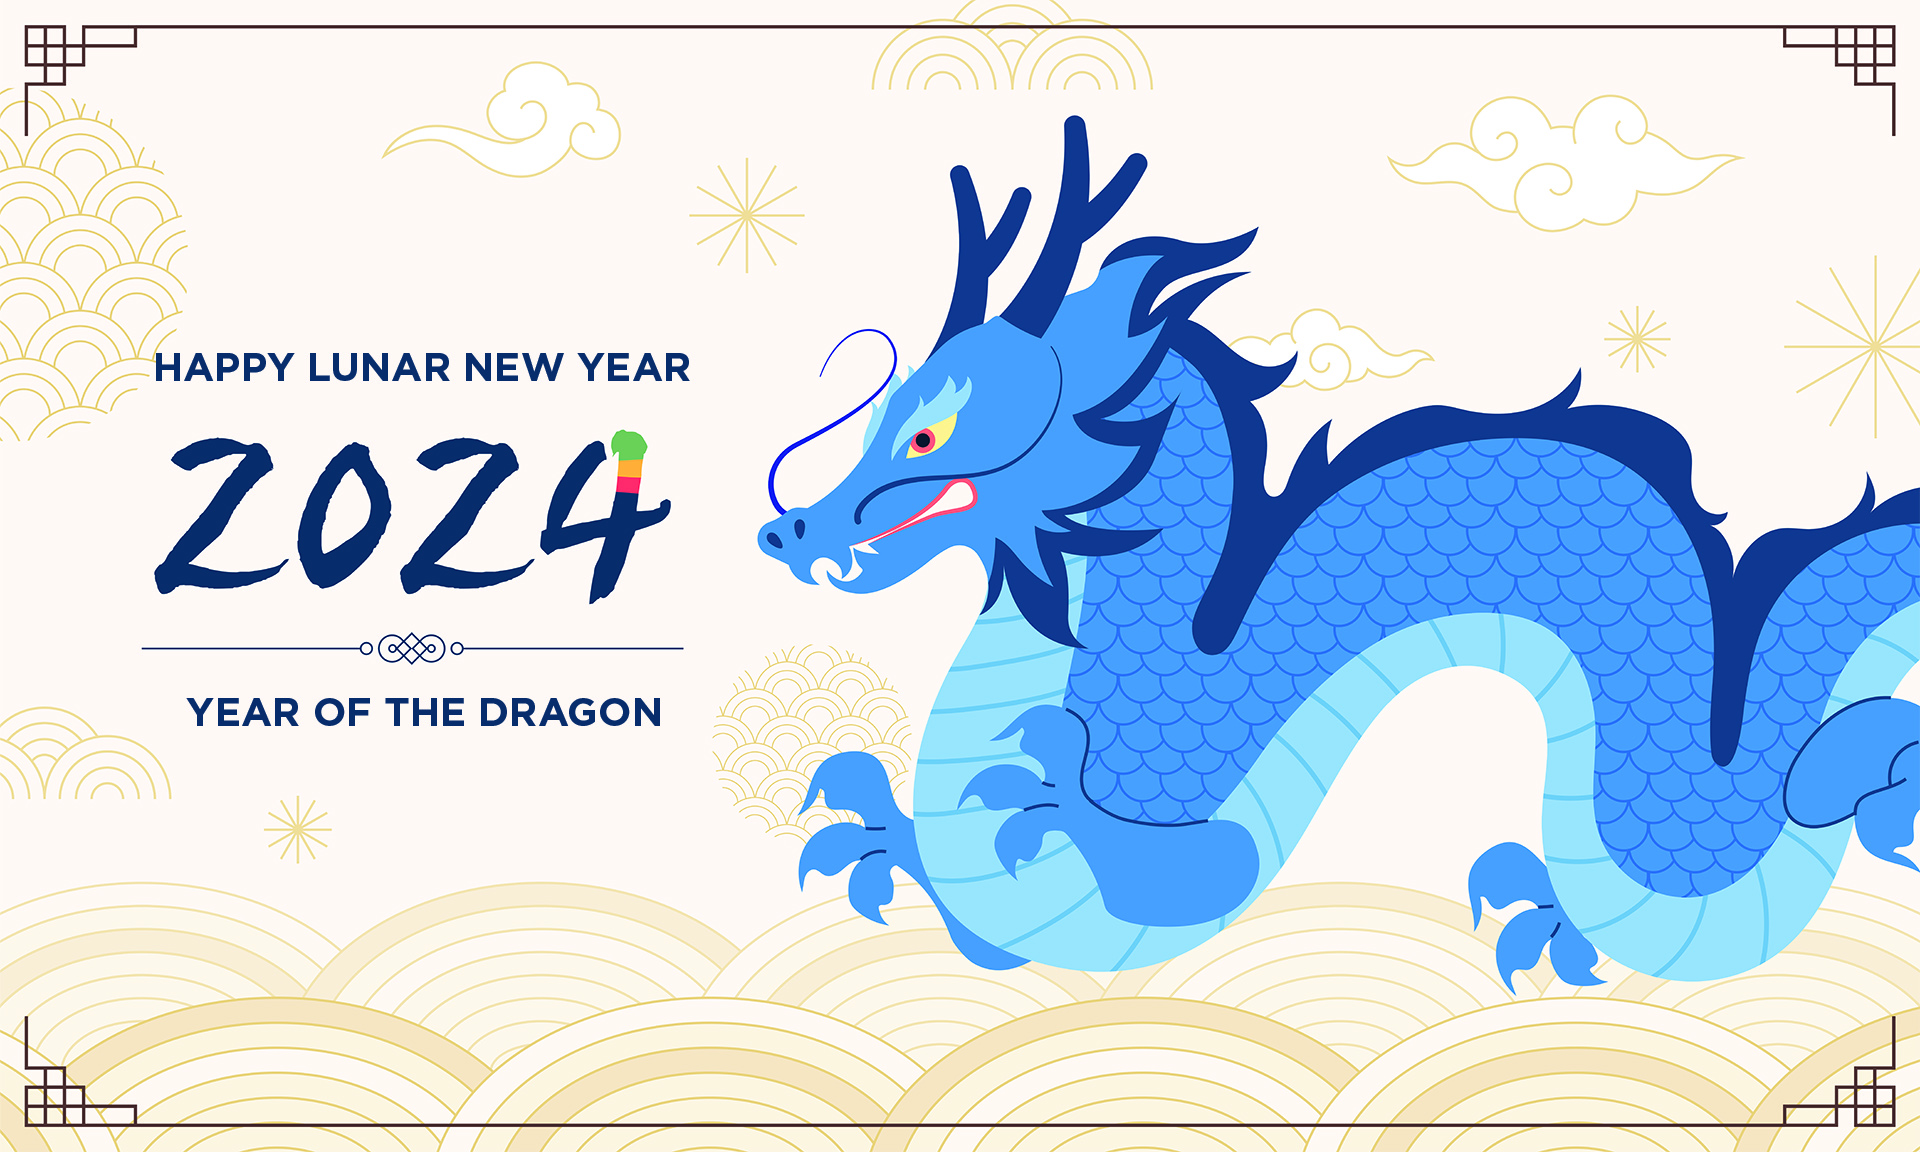 Image of a blue dragon with the words 